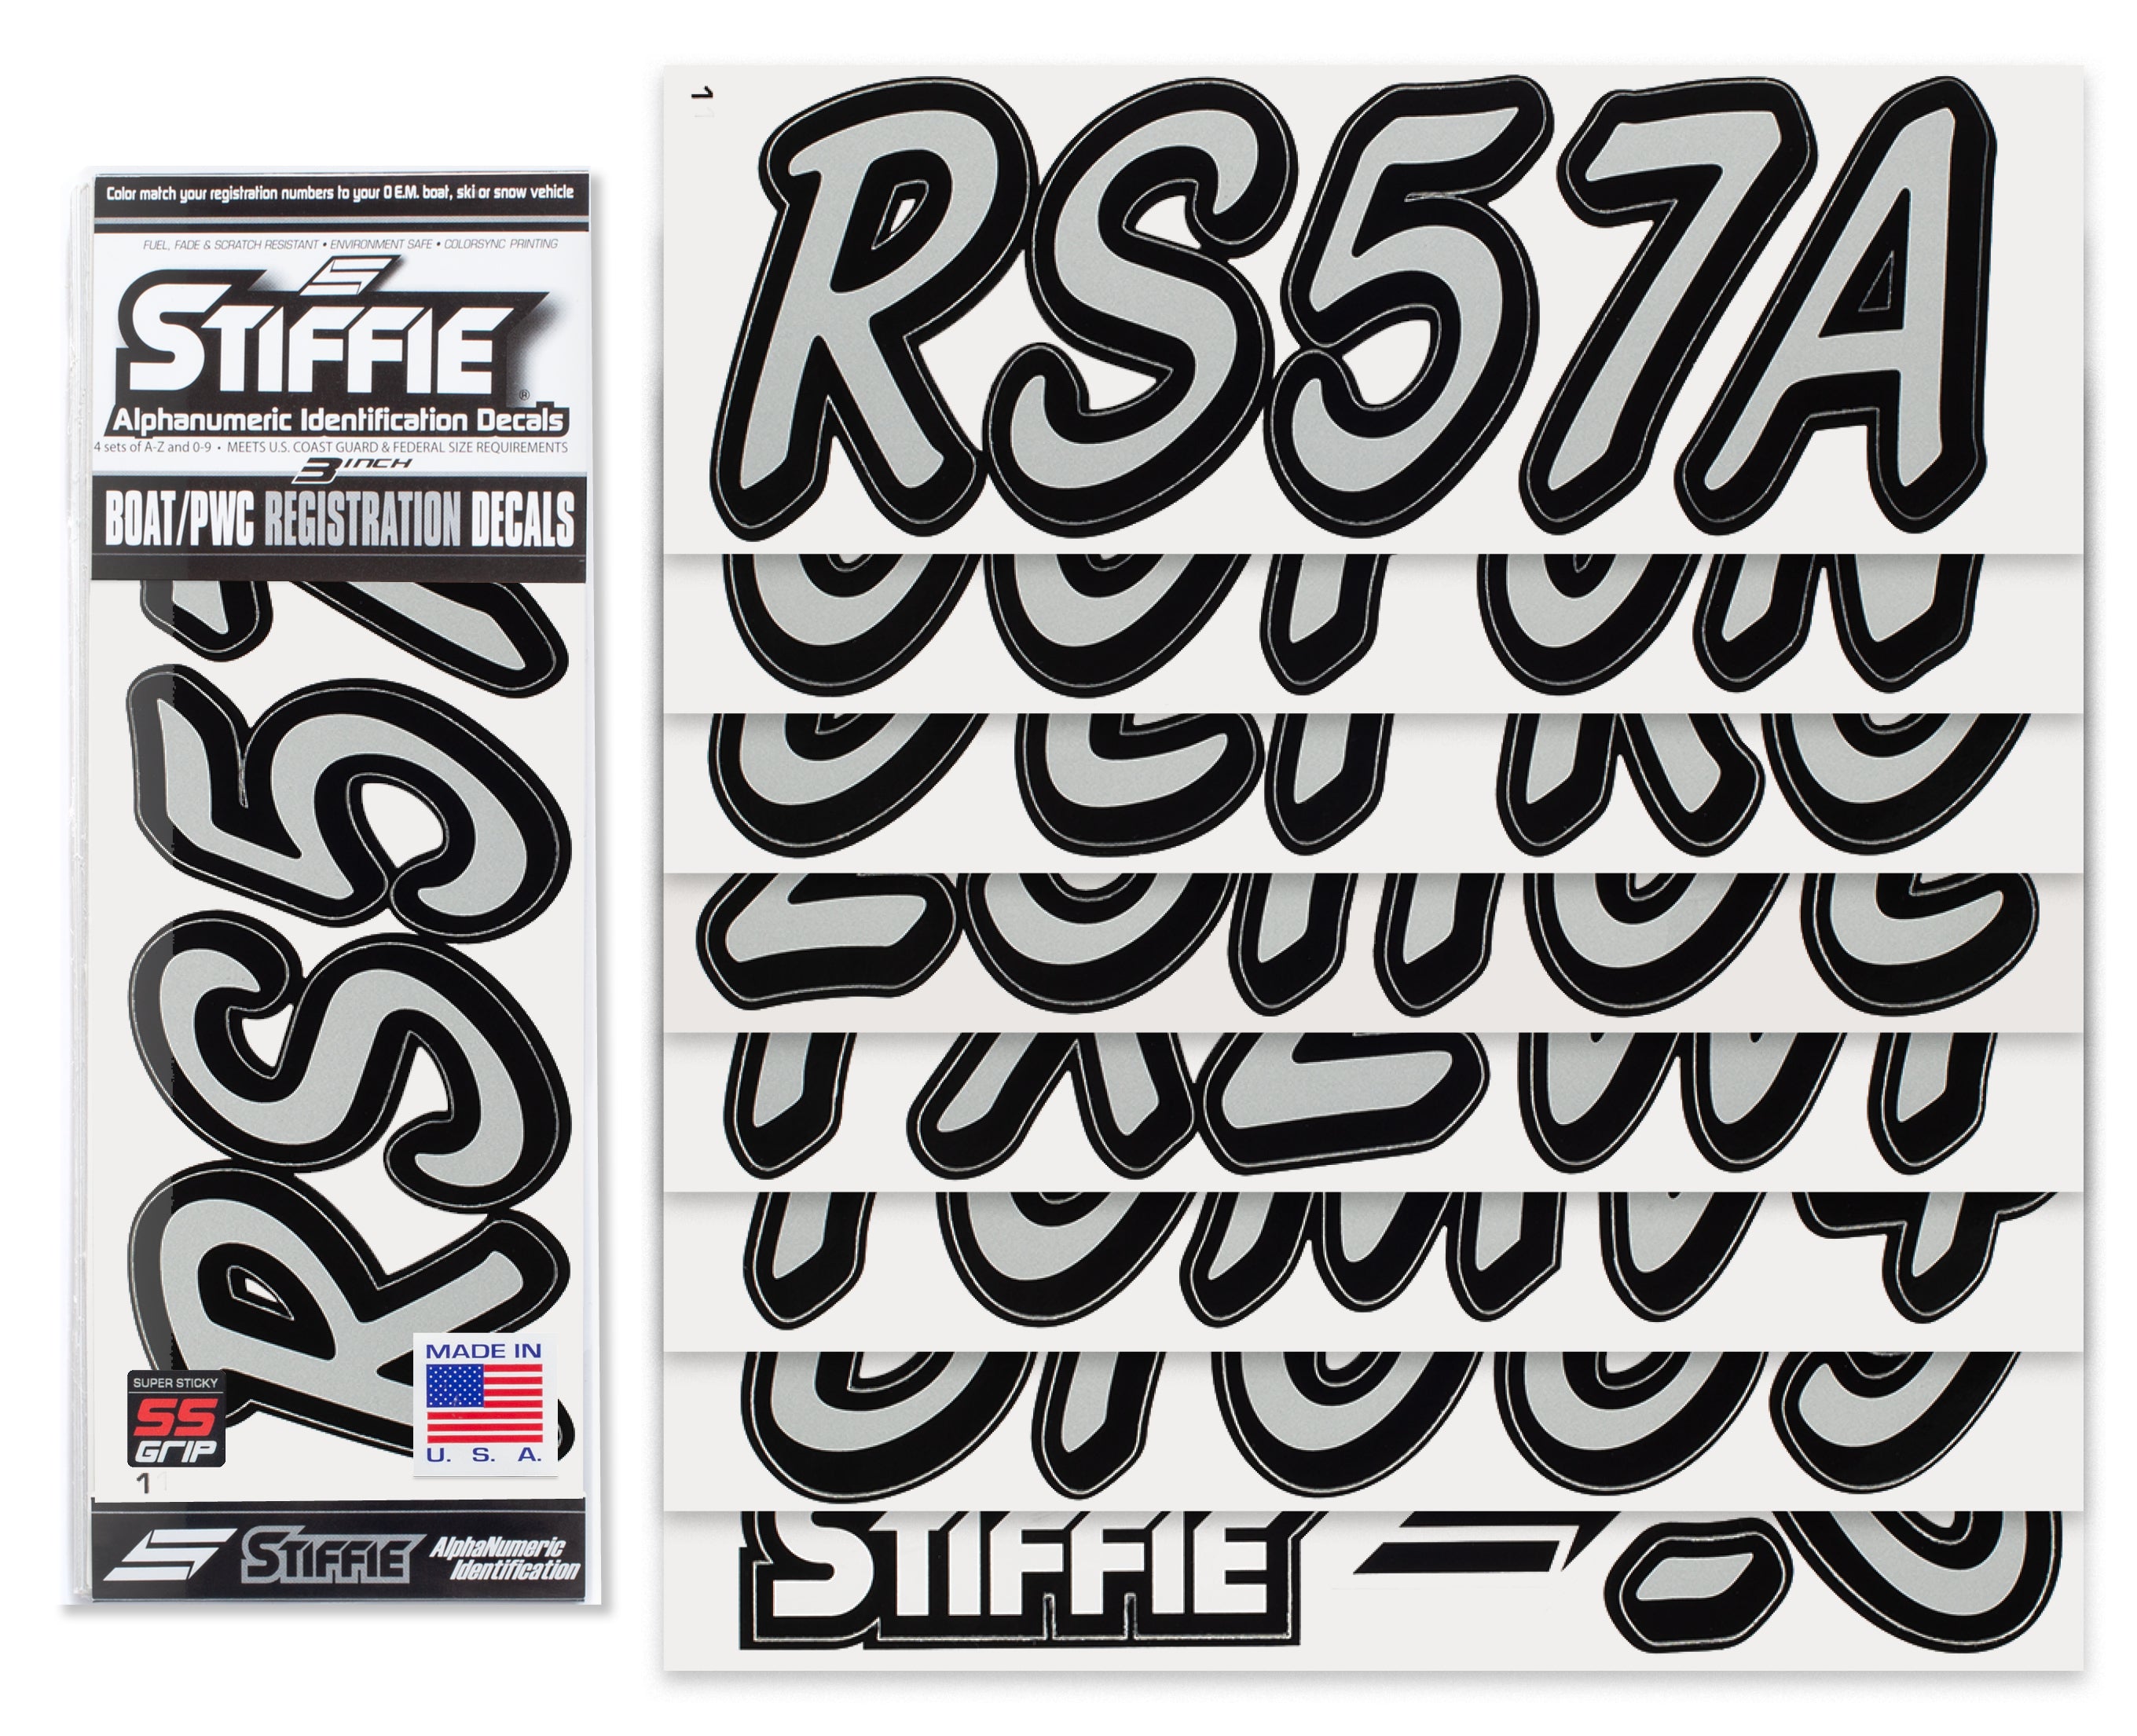 STIFFIE Whipline Solid Silver/Black Super Sticky 3" Alpha-Numeric Registration Identification Numbers Stickers Decals for Boats & Personal Watercraft